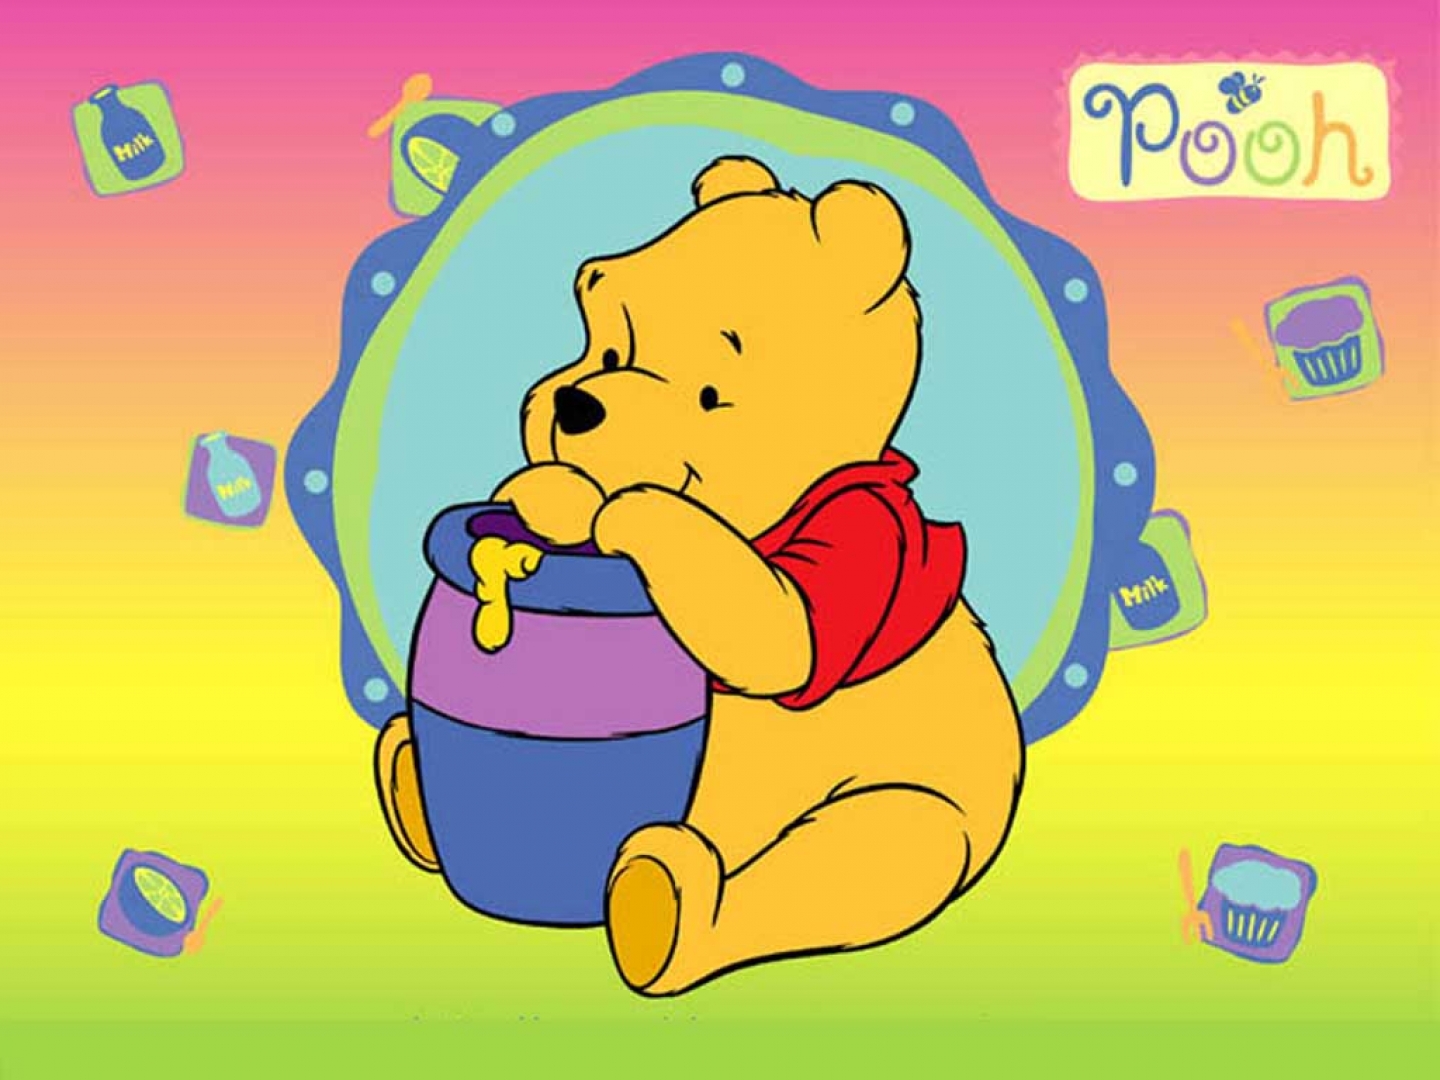 720x1280 Winnie The Pooh Wallpapers for Mobile Phone HD